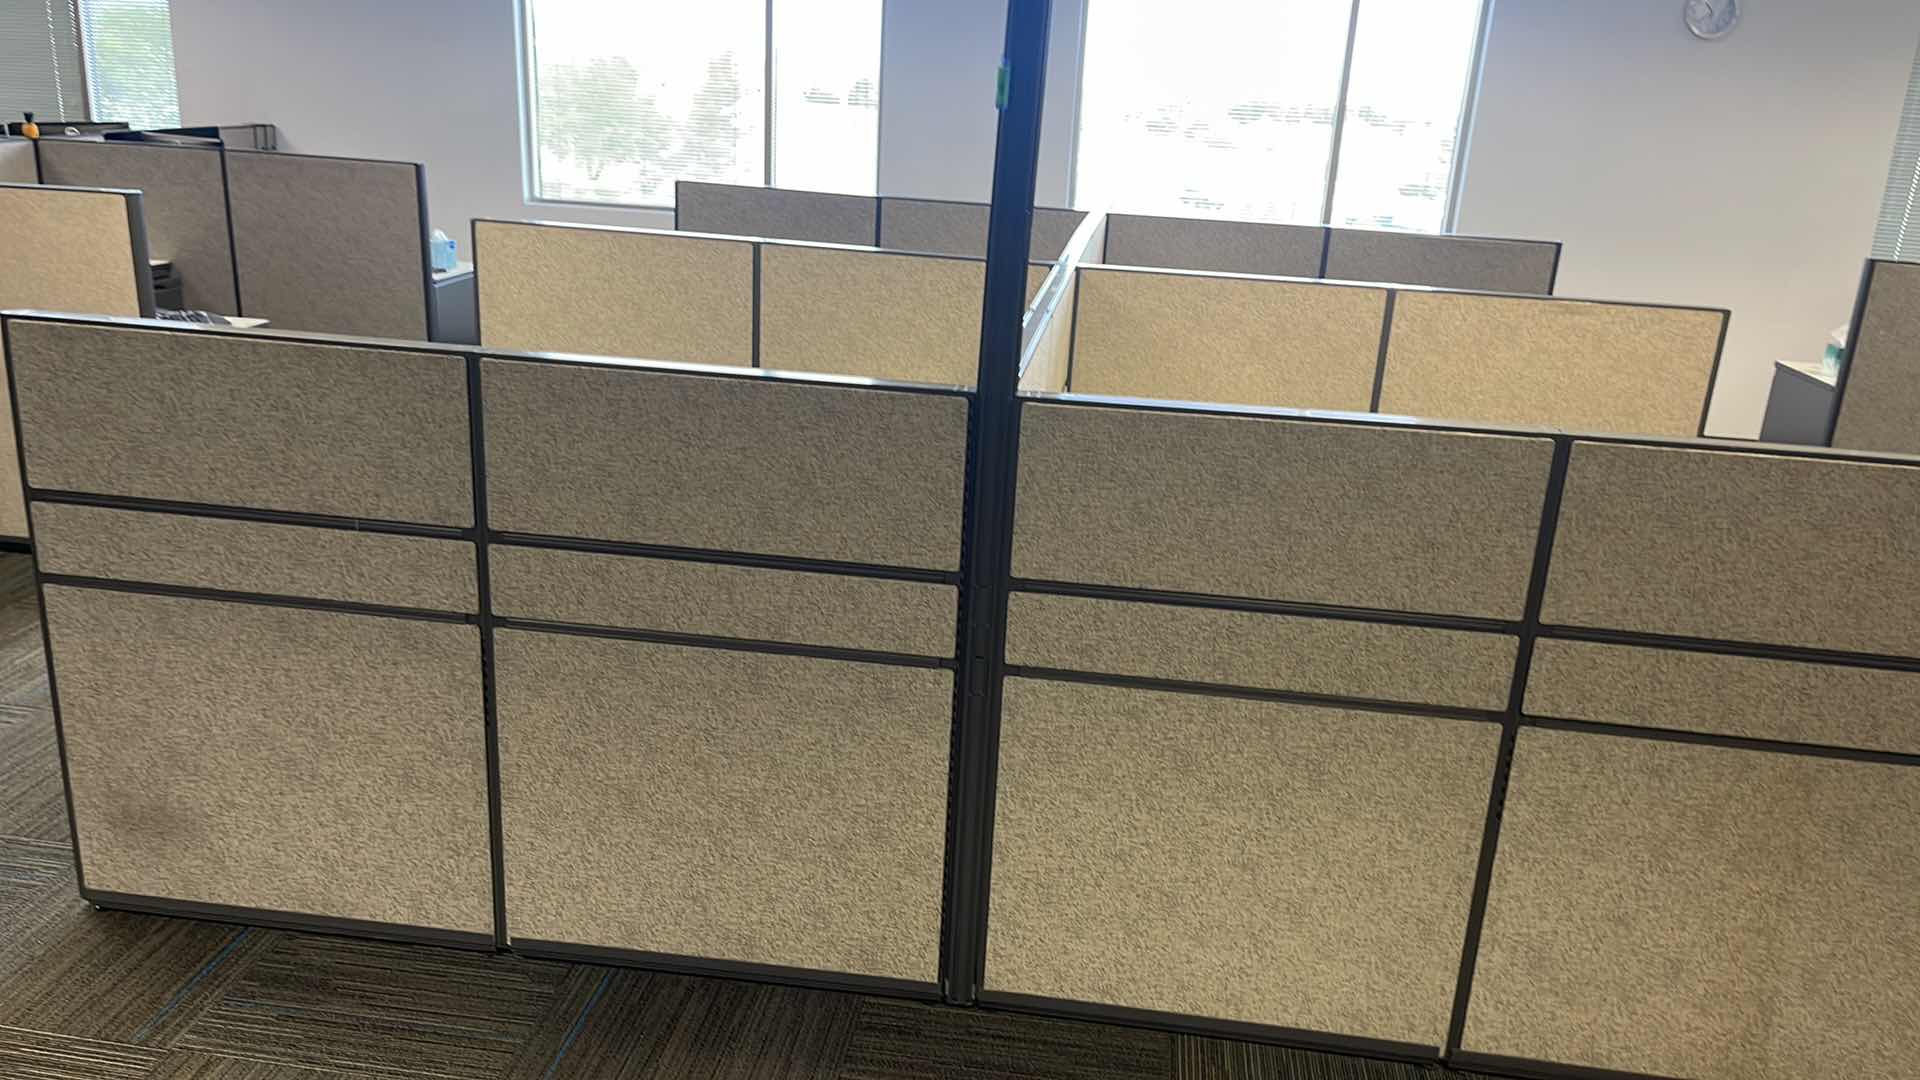 Photo 2 of 6 PC CUBICAL SET W 5 DRAWER MEDAL BASE DESKS 76” X 76” H50” (BUYER TO DISASSEMBLE & REMOVE FROM 2ND STORY OFFICE BUILDING W ELEVATOR)